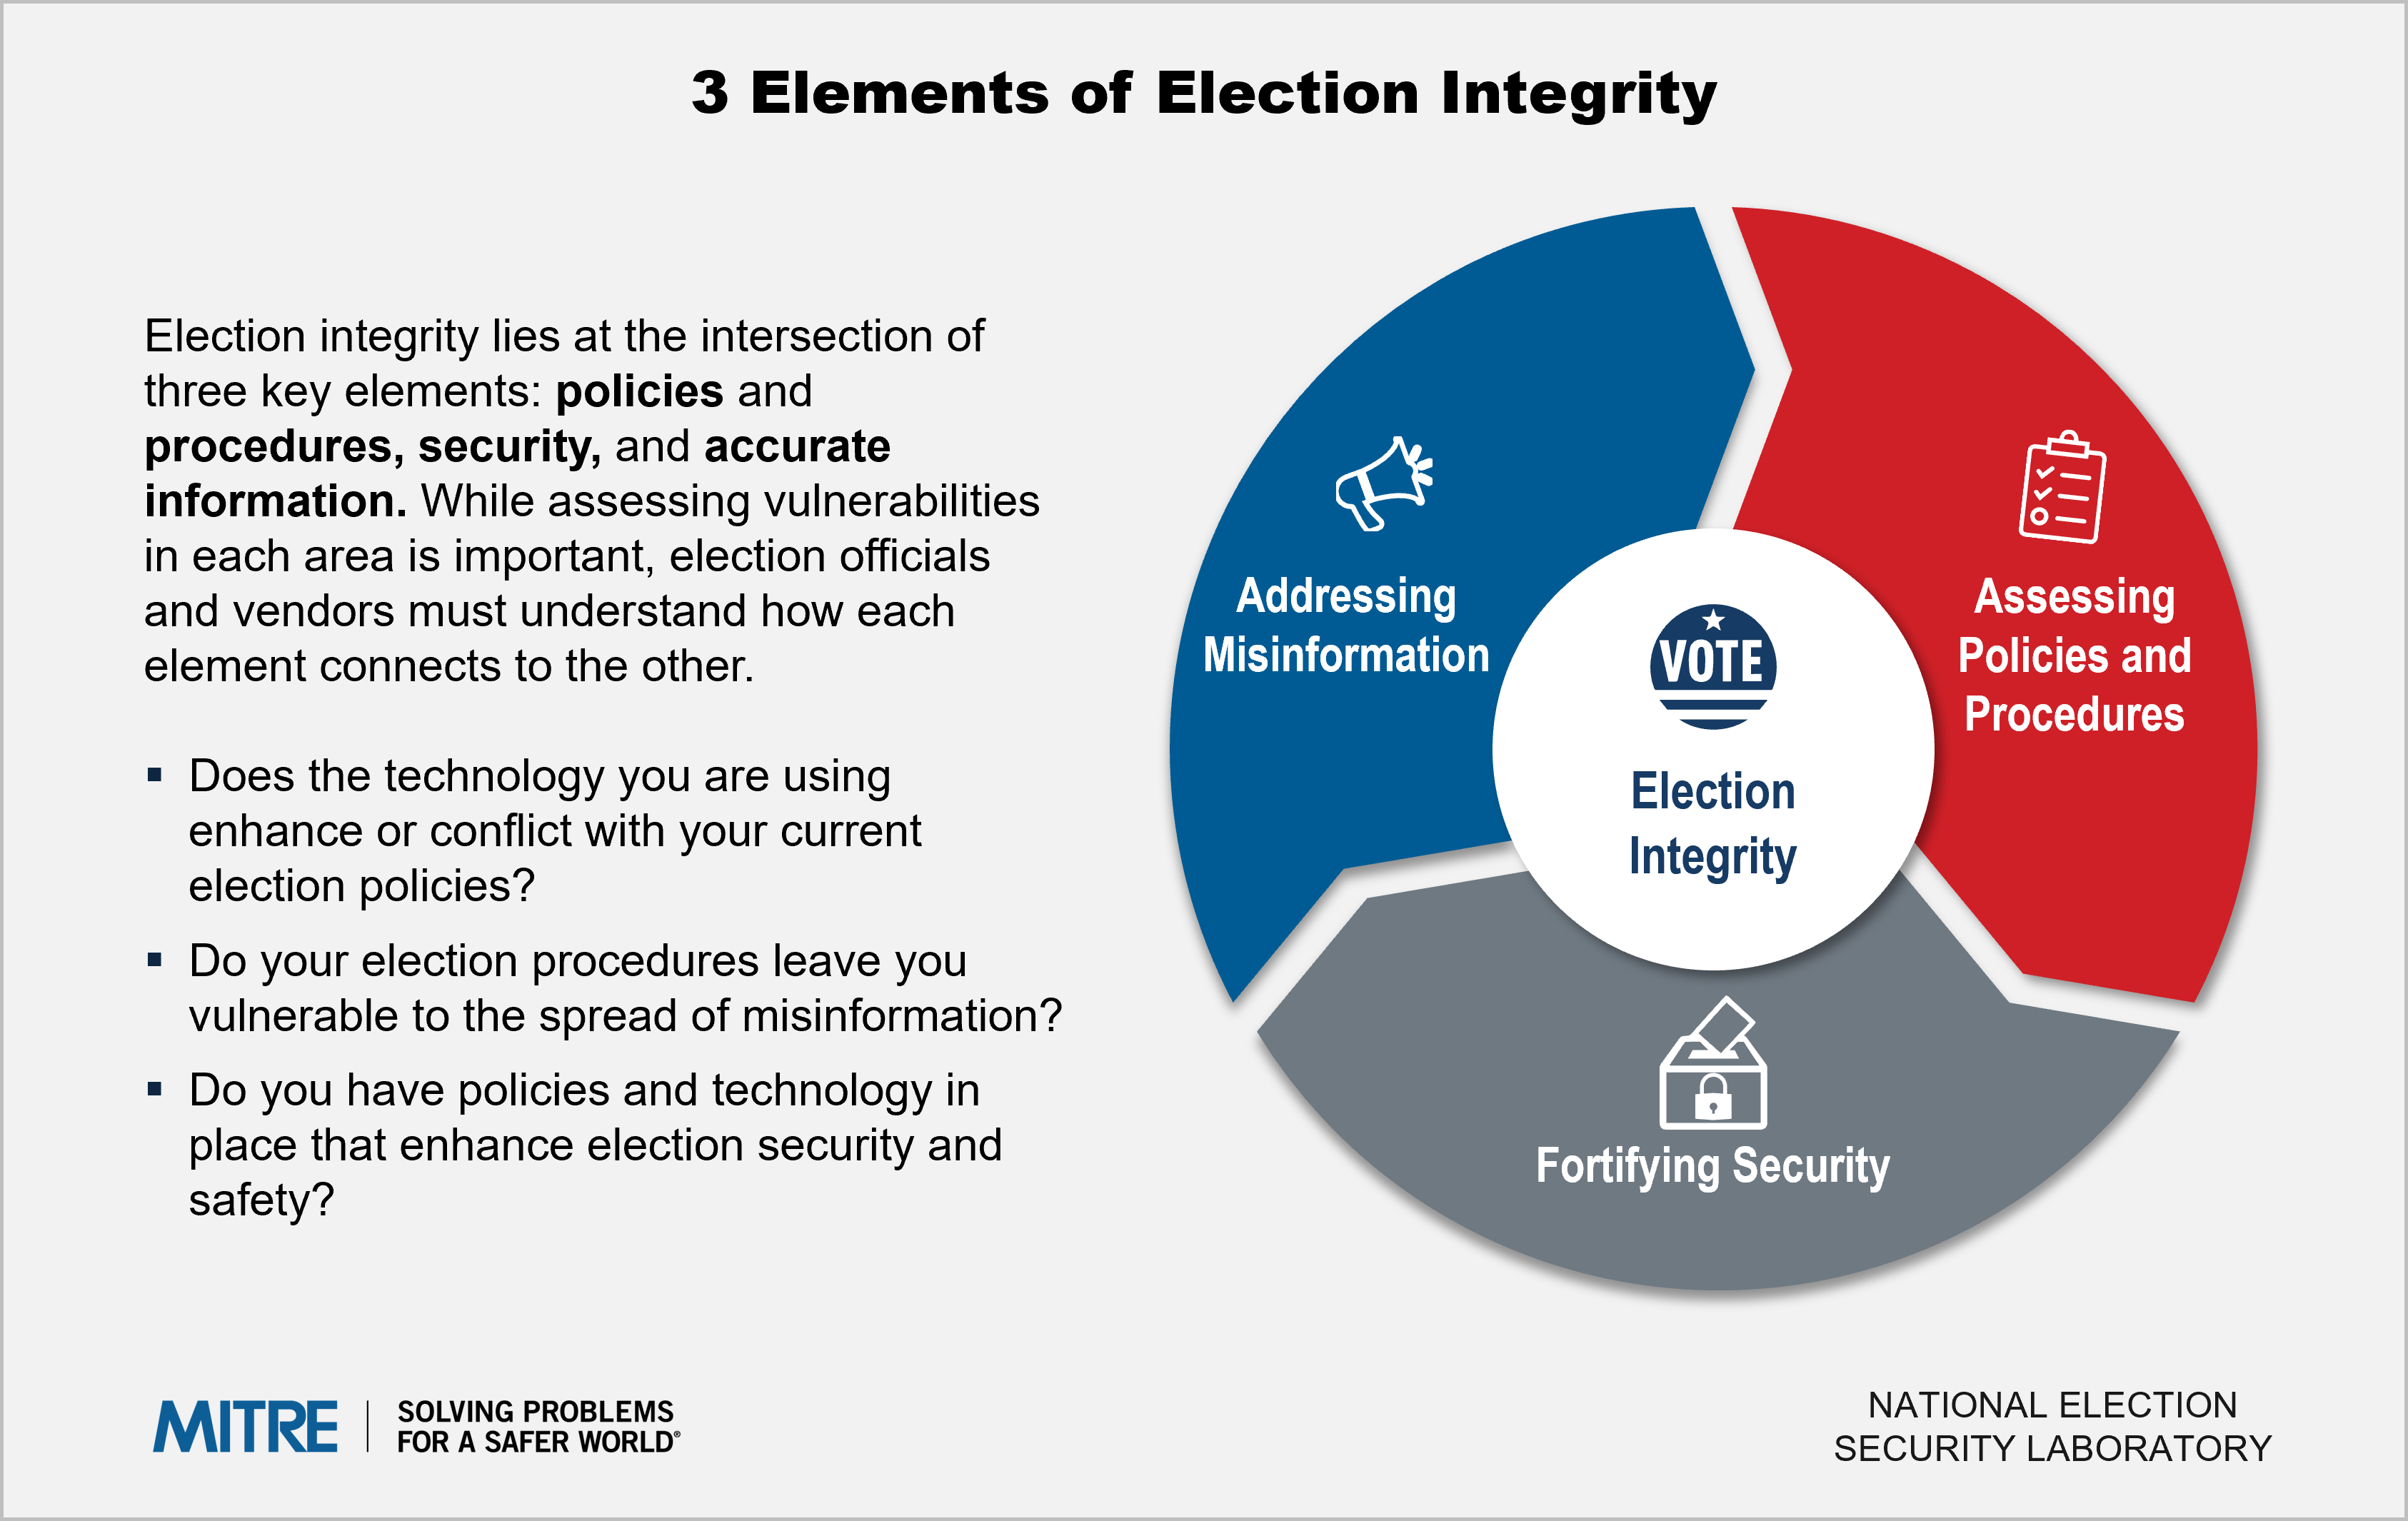 National Election Security Lab - 3 Elements of Election Integrity